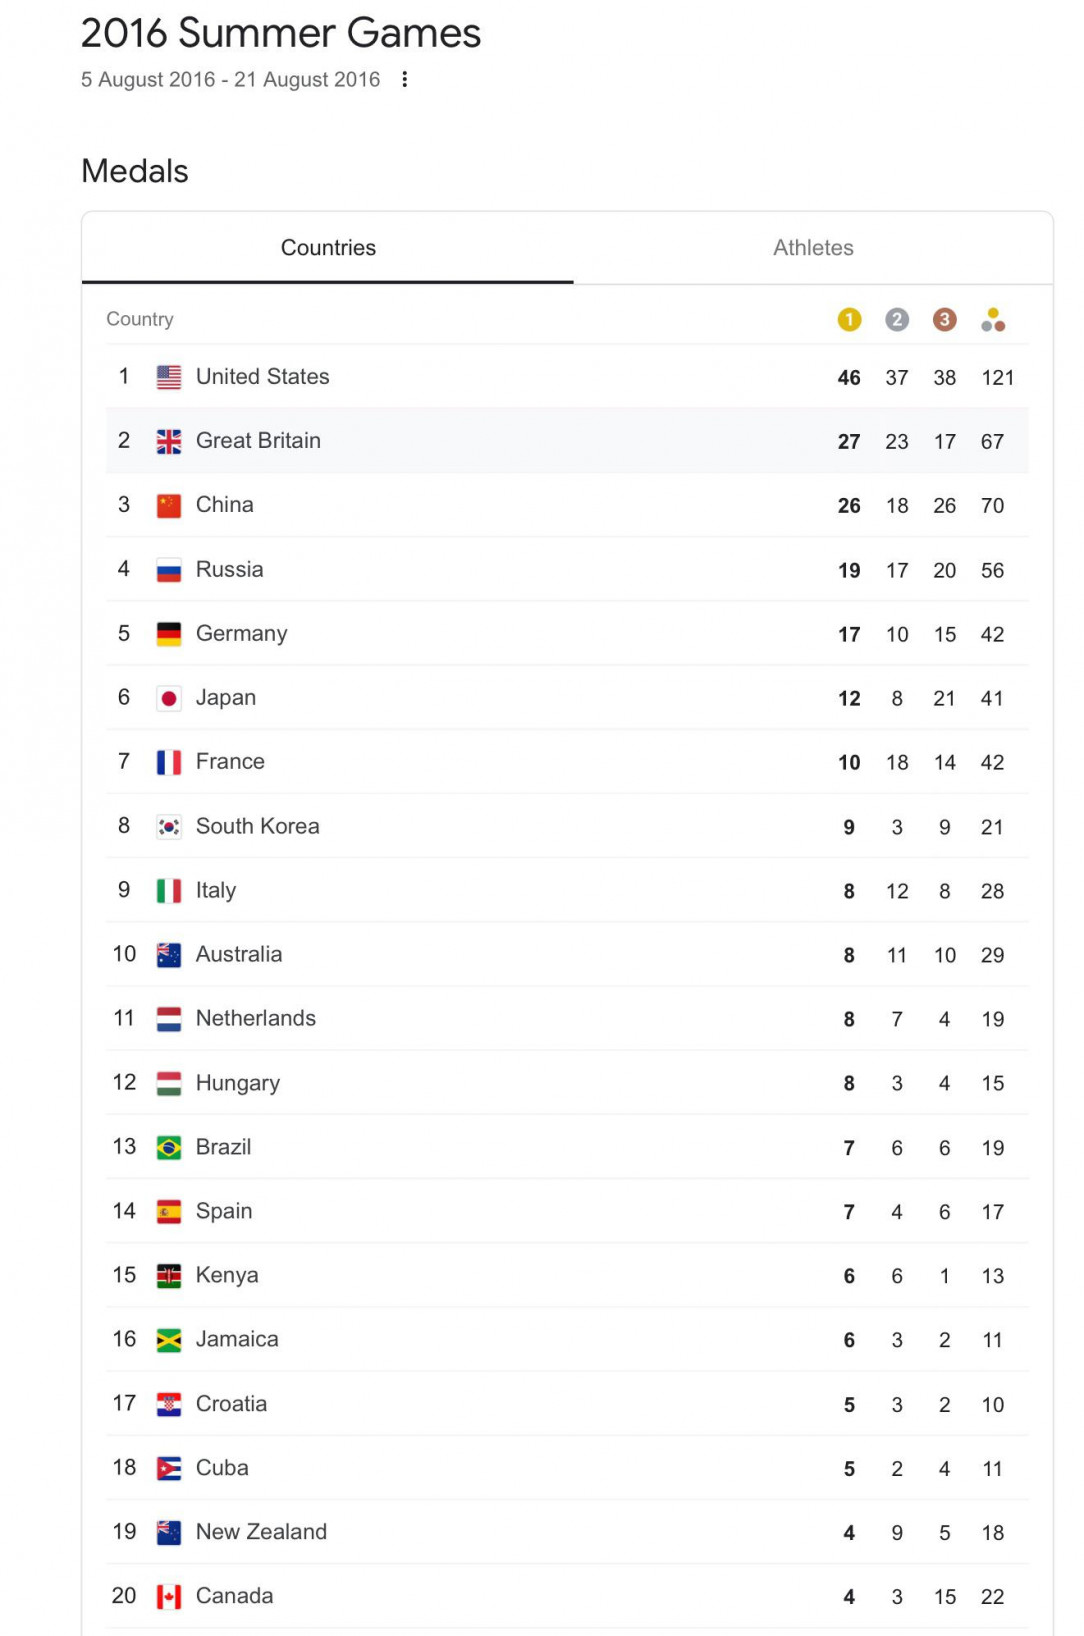 2016 Olympic medal table. Good luck to all the countries participating in Tokyo!